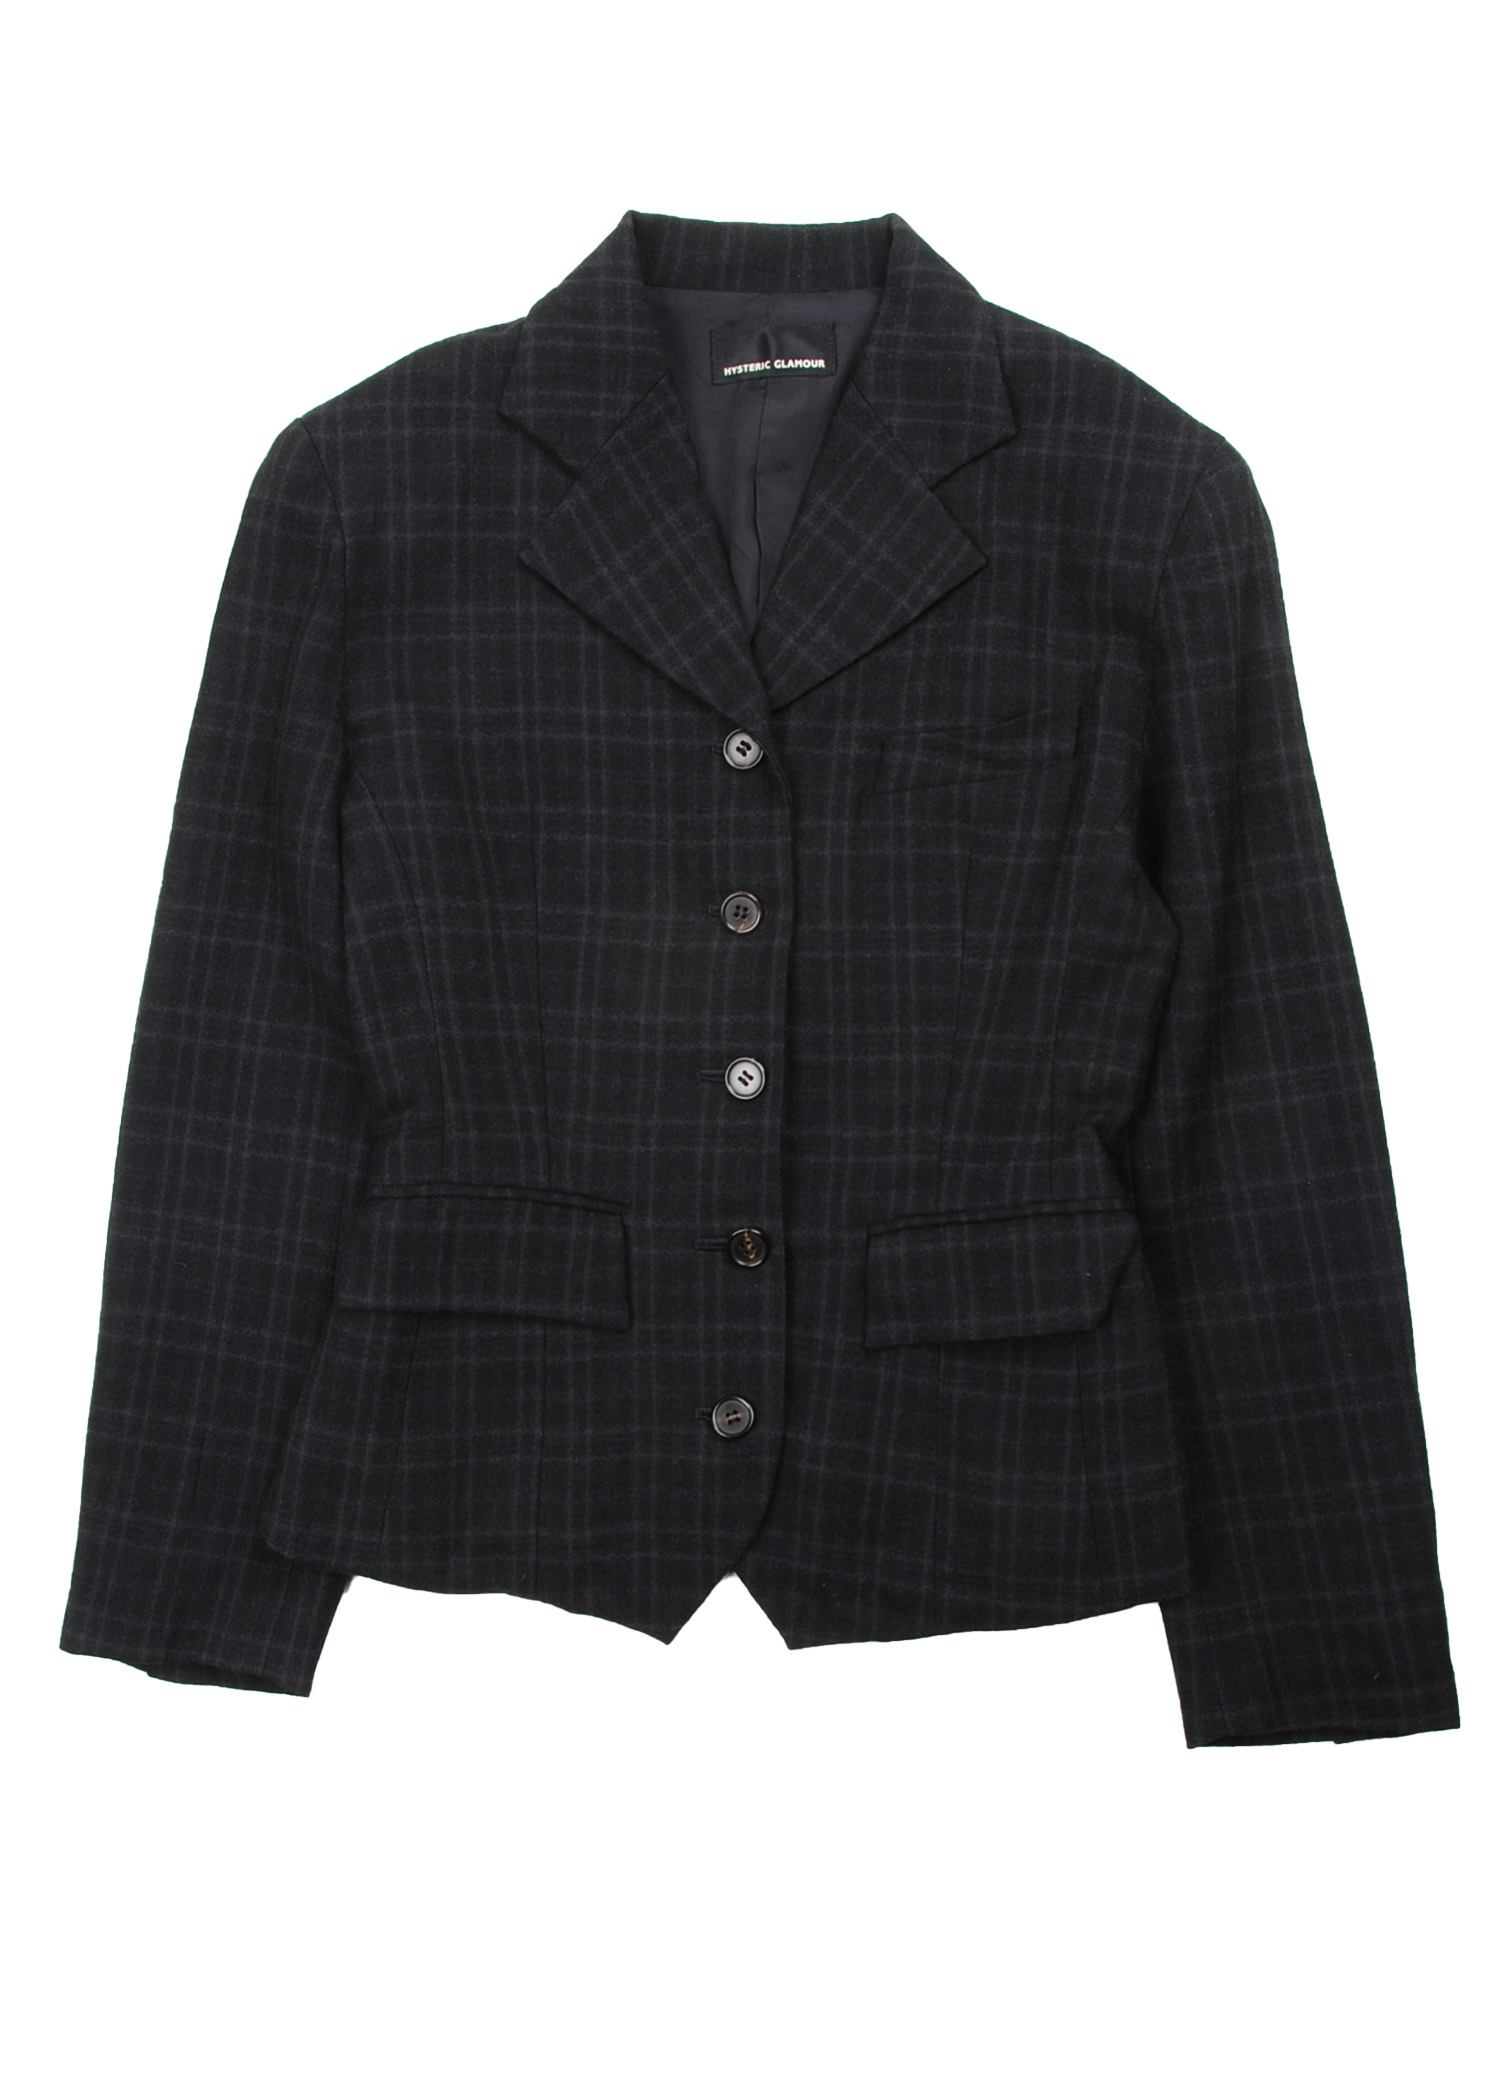 HYSTERIC GLAMOUR tailored check jacket